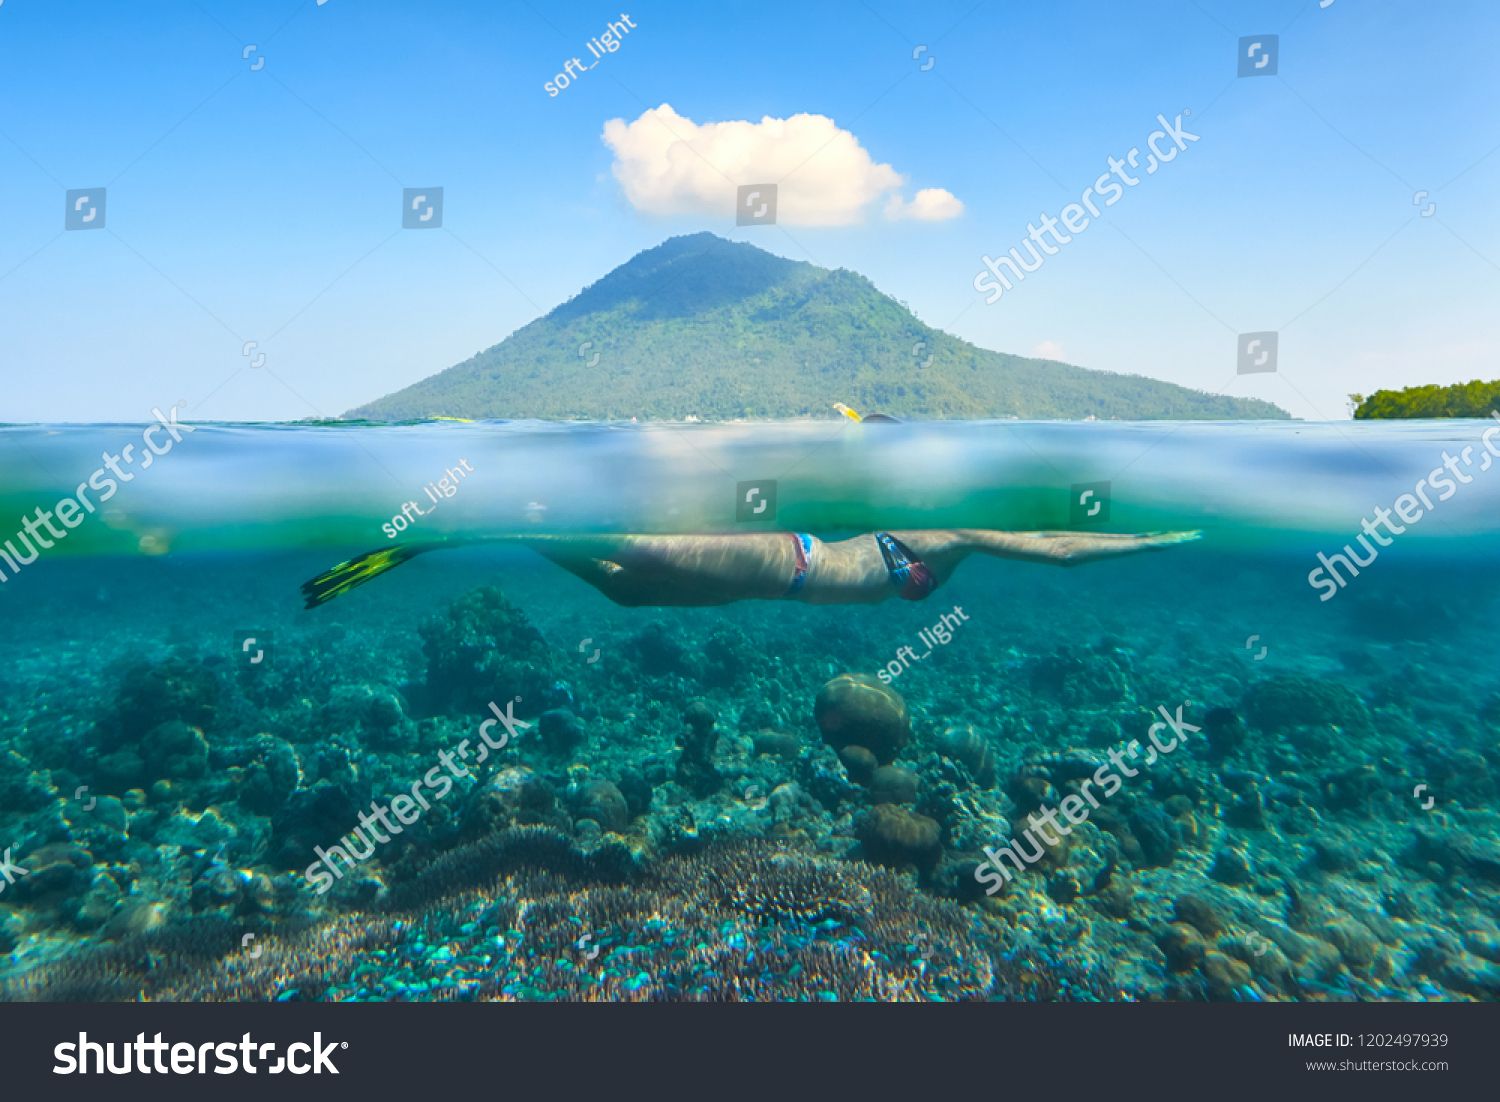 Snorkeling Over A Beautiful Coral Reef In The Background